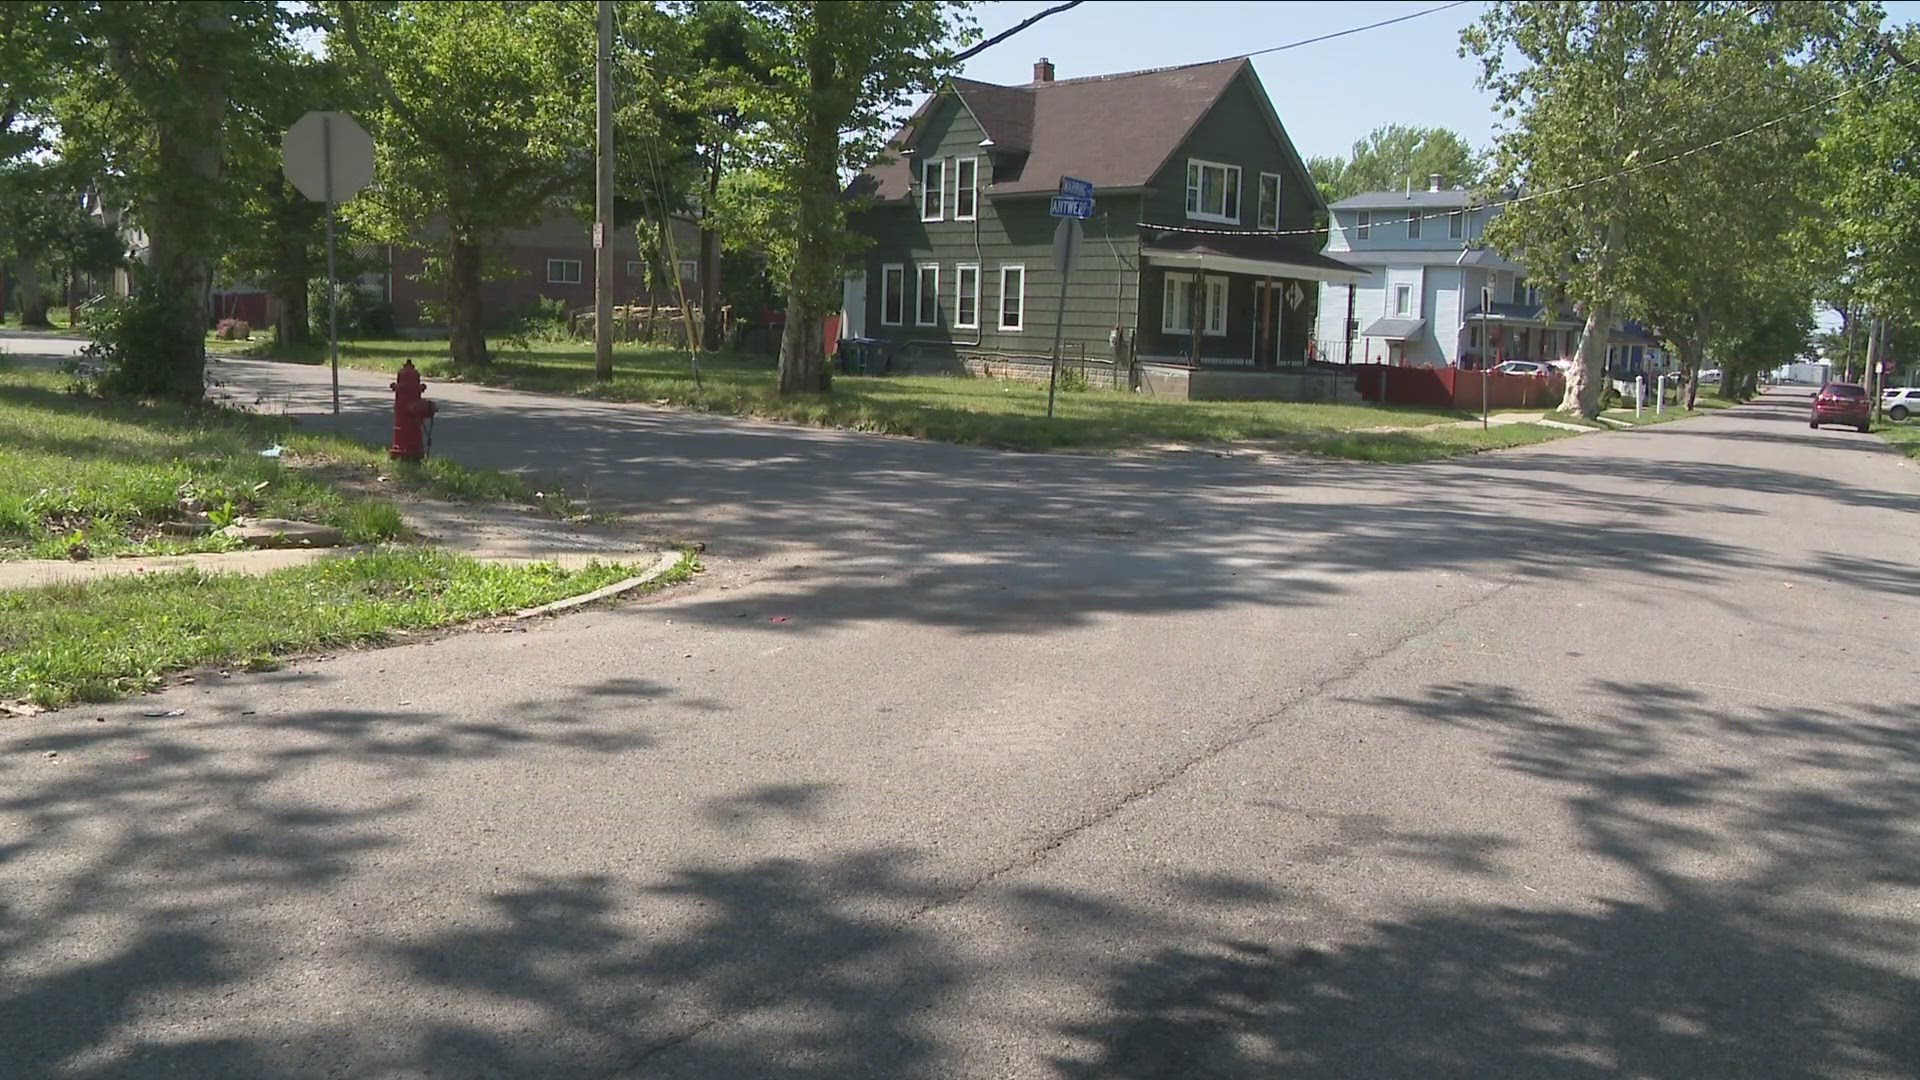 Buffalo police are investigating a deadly shooting on Warring Ave